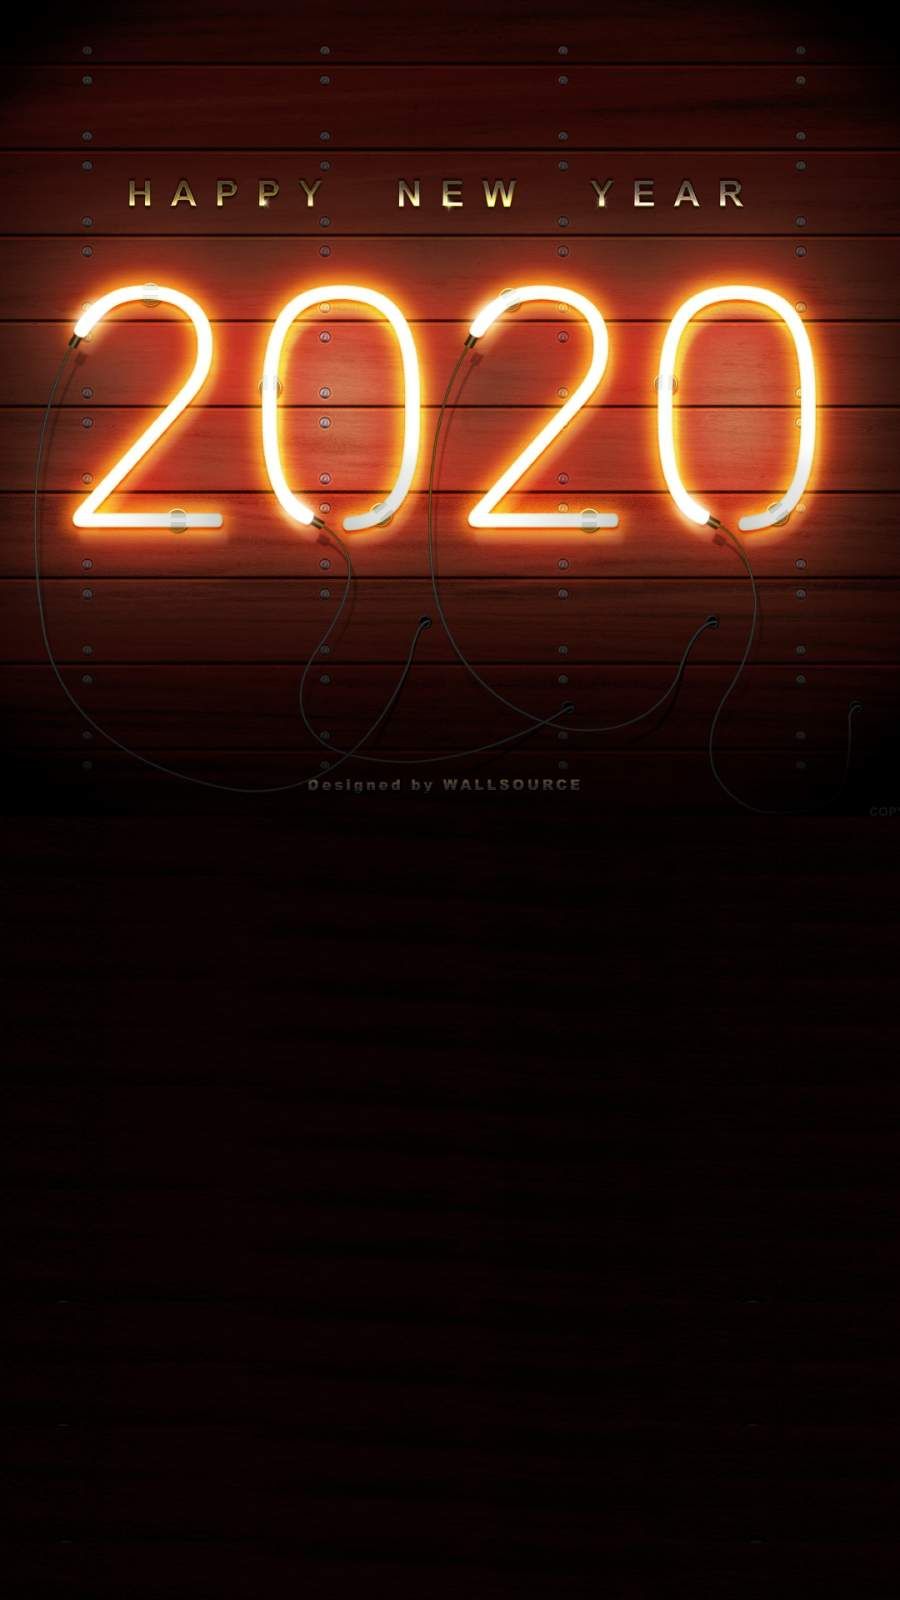 Happy New Year 2020 iPhone Wallpaper in 2020 Happy new year